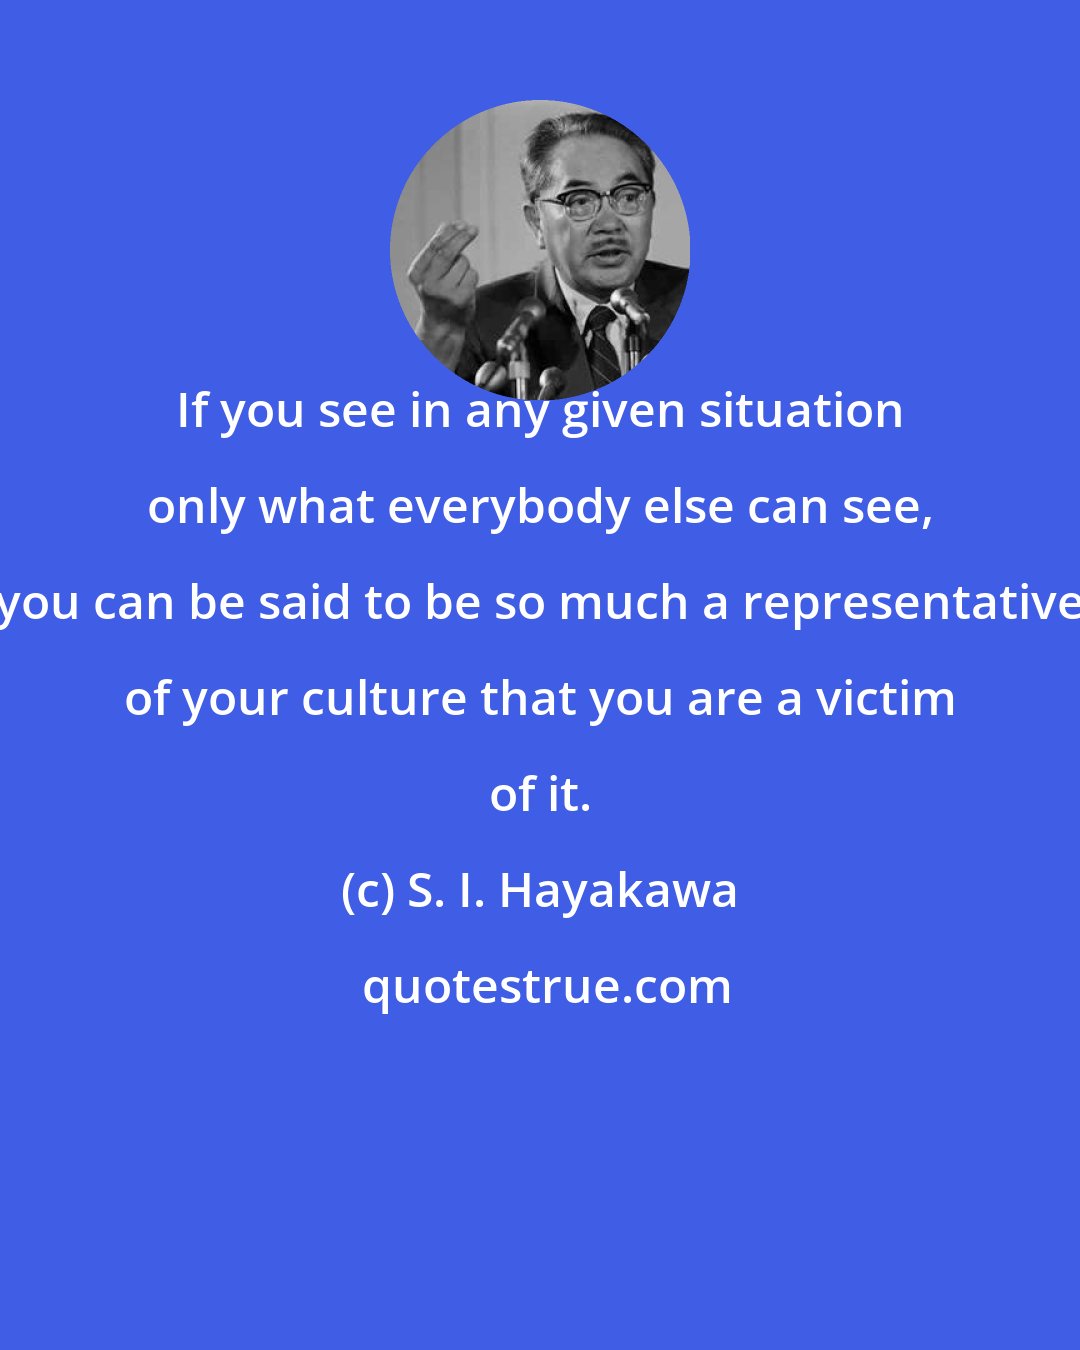 S. I. Hayakawa: If you see in any given situation only what everybody else can see, you can be said to be so much a representative of your culture that you are a victim of it.